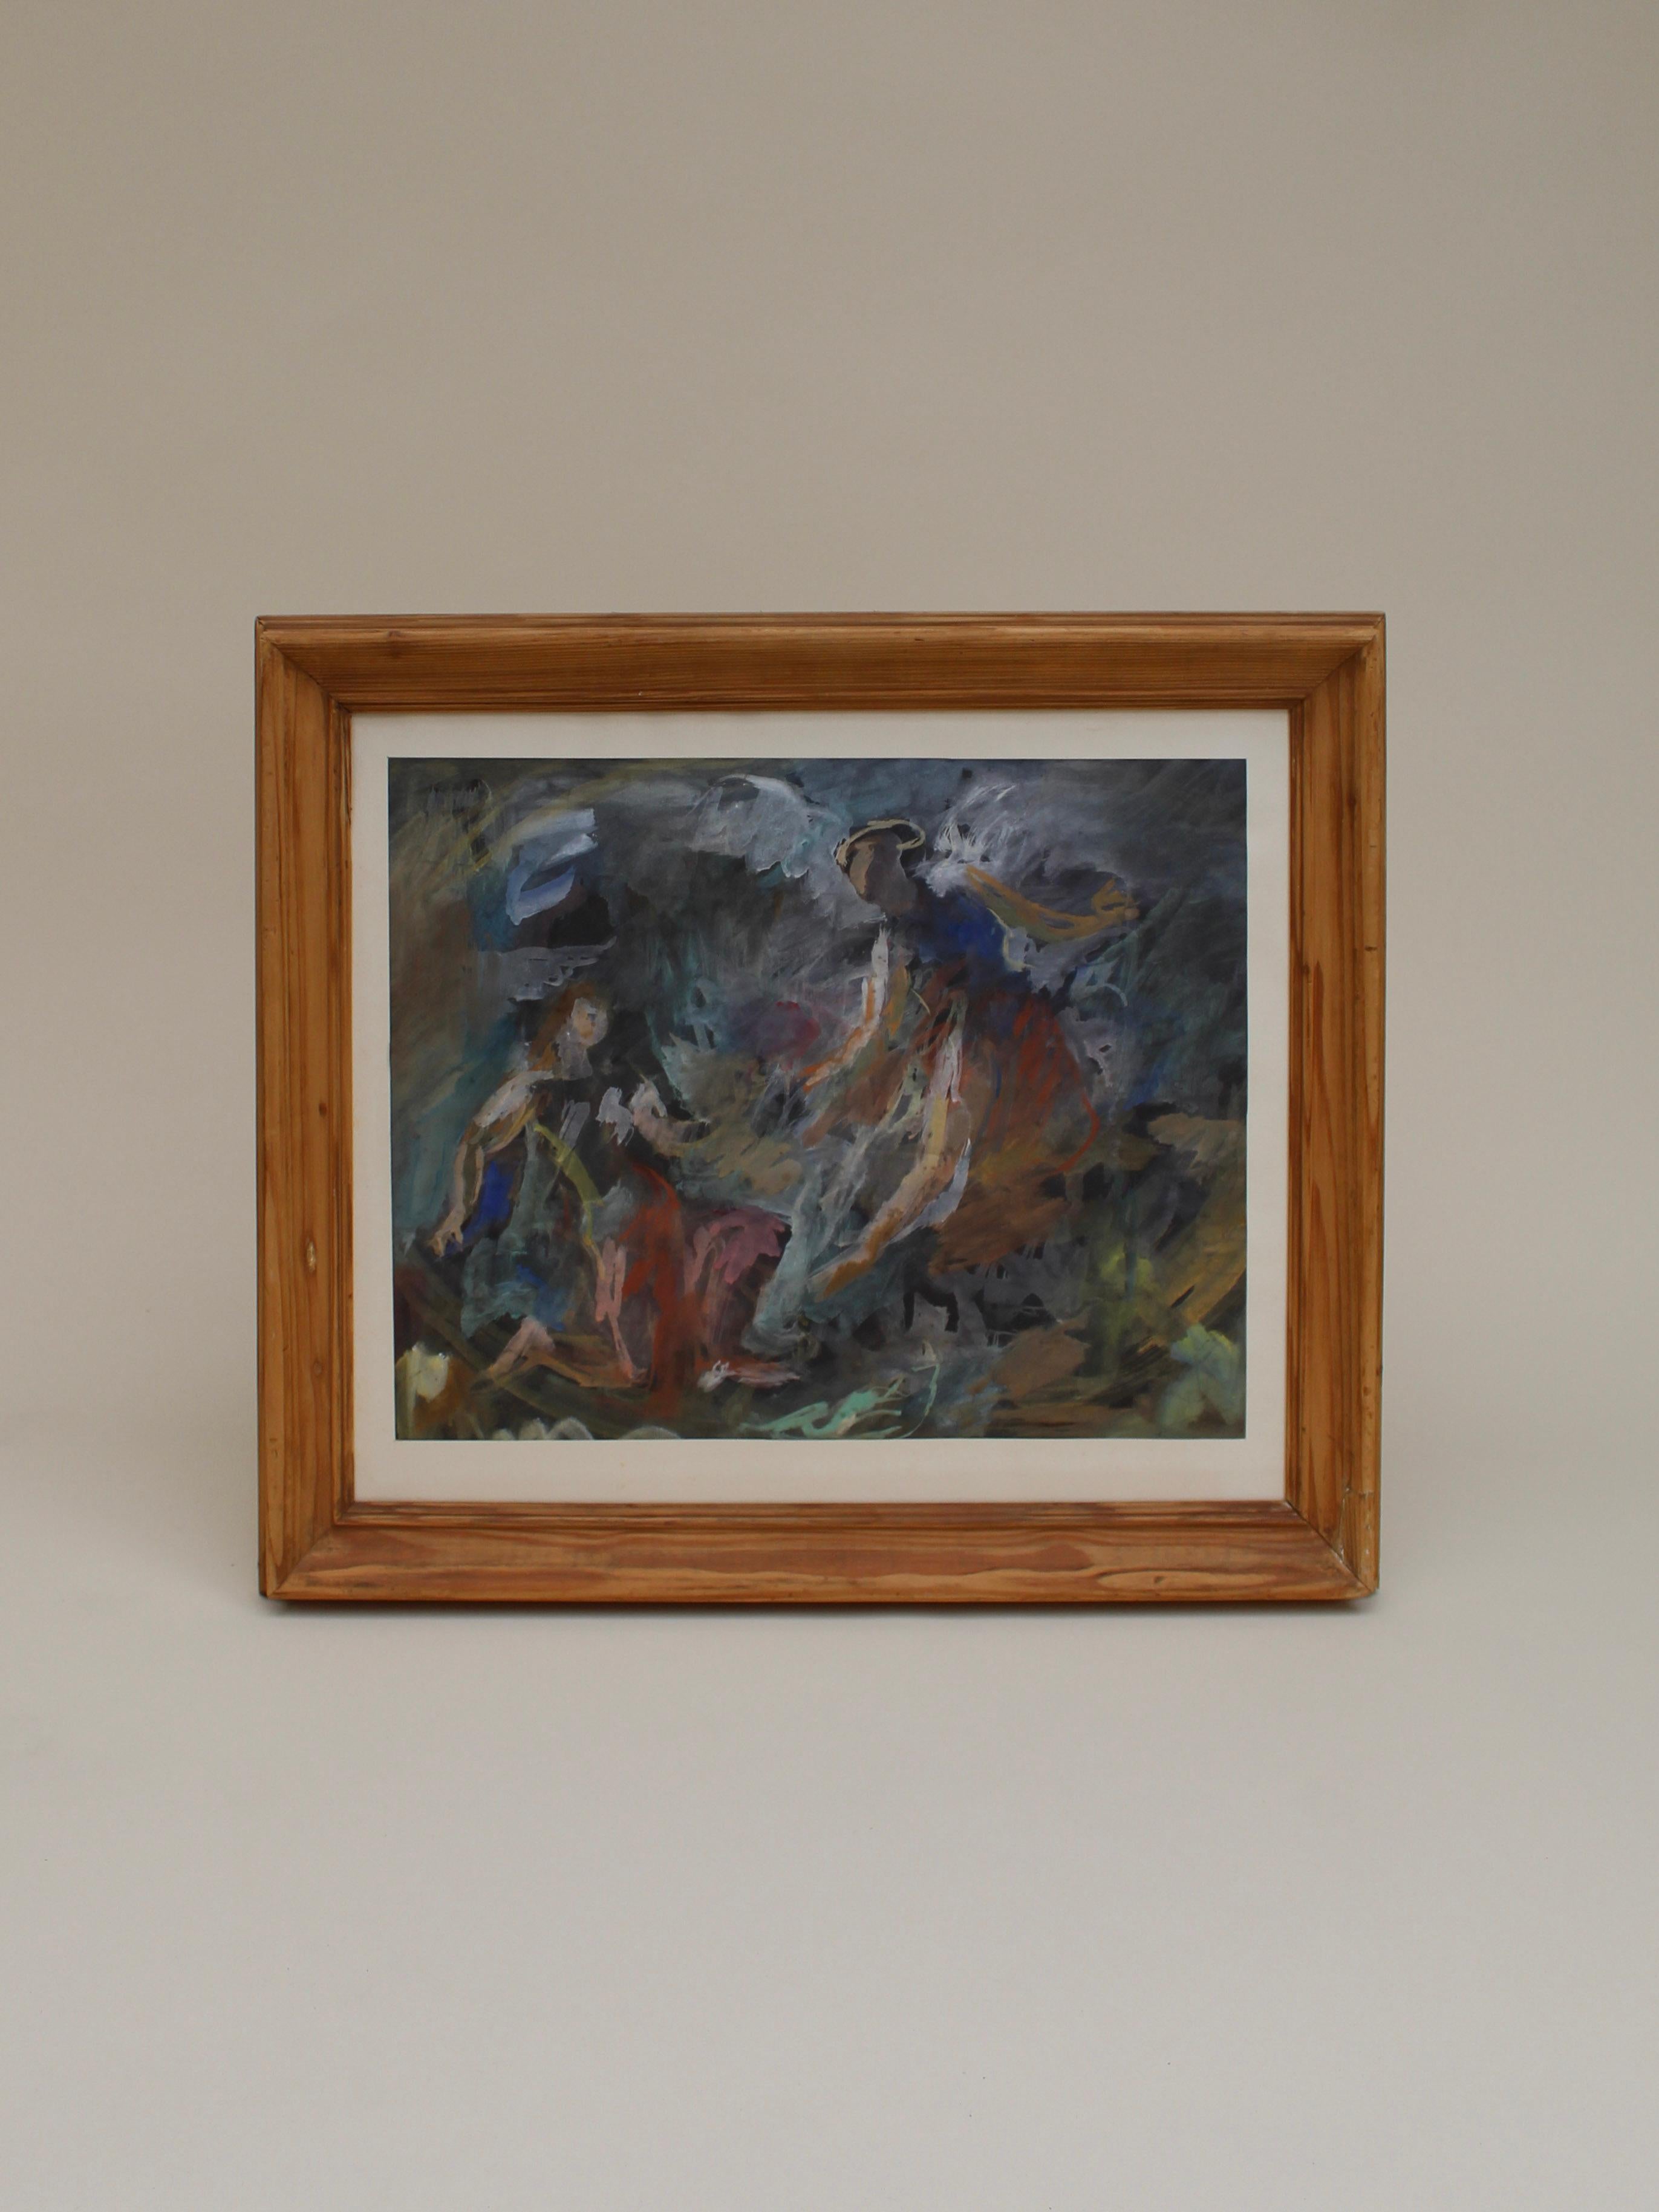 A watercolour on paper capturing a religious scene of angels. Housed in a period pitch pine frame with age-related wear. Signed to verso. 

Artist: Max Tomka
Medium: Watercolour on paper
Dimensions: H 480mm x W 540mm
Origin: Europe